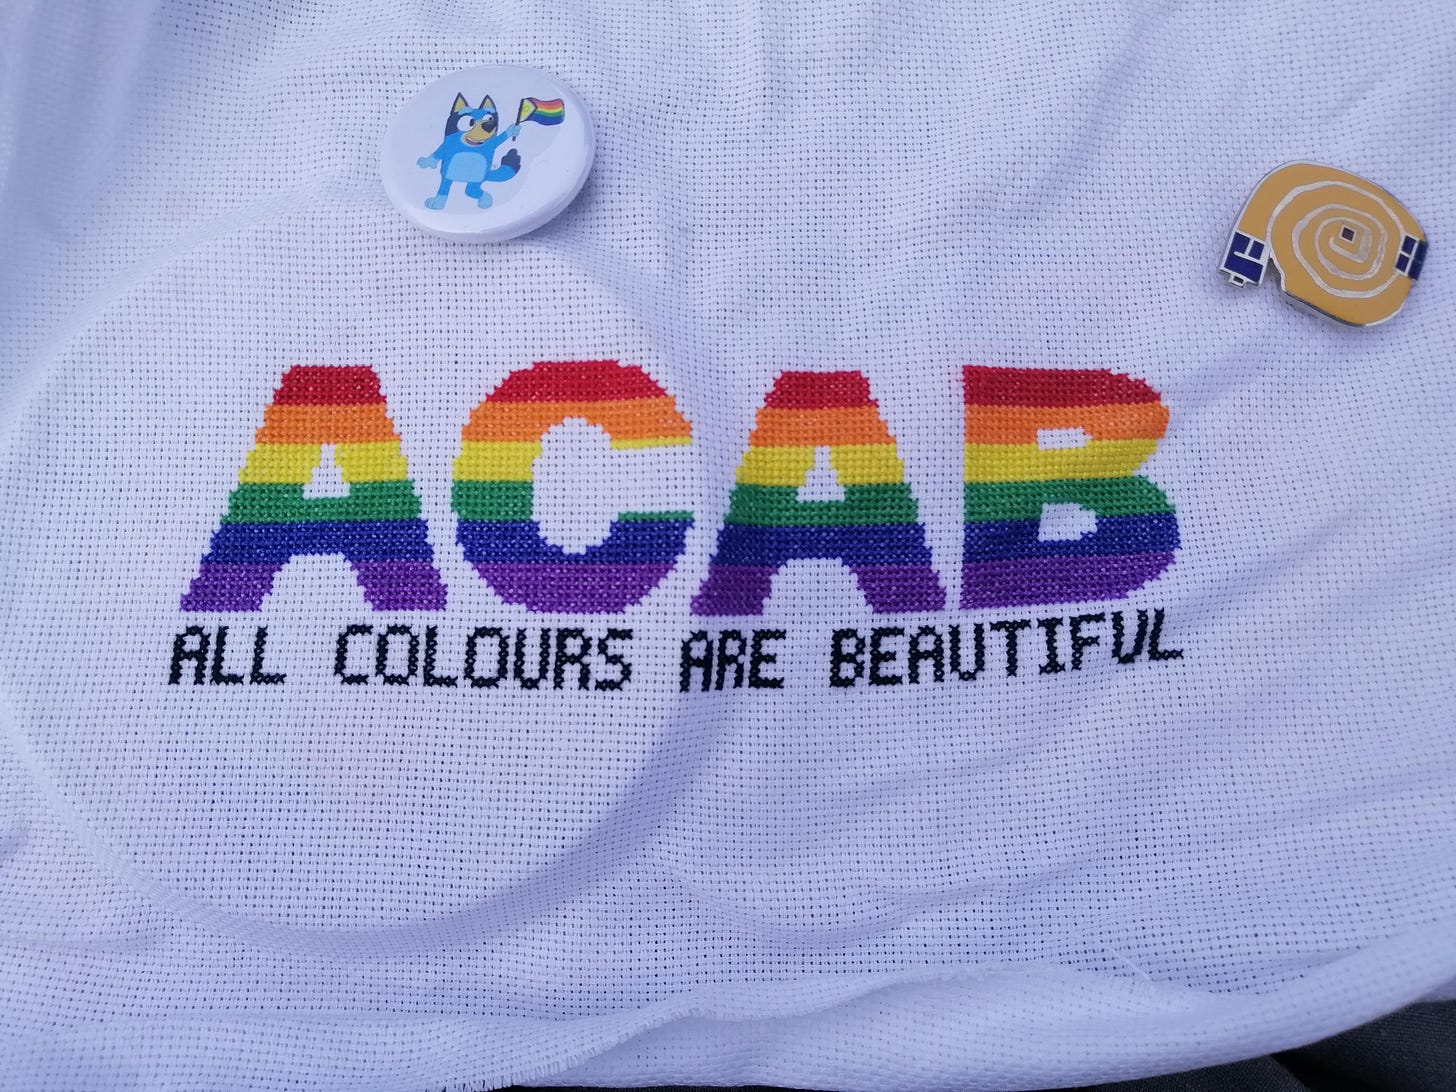 cross stitch with ACAB in rainbow text and "ALL COLOURS ARE BEAUTIFUL" in black below. There is a needleminder and a pin with Bluey holding an inclusive rainbow flag on the fabric